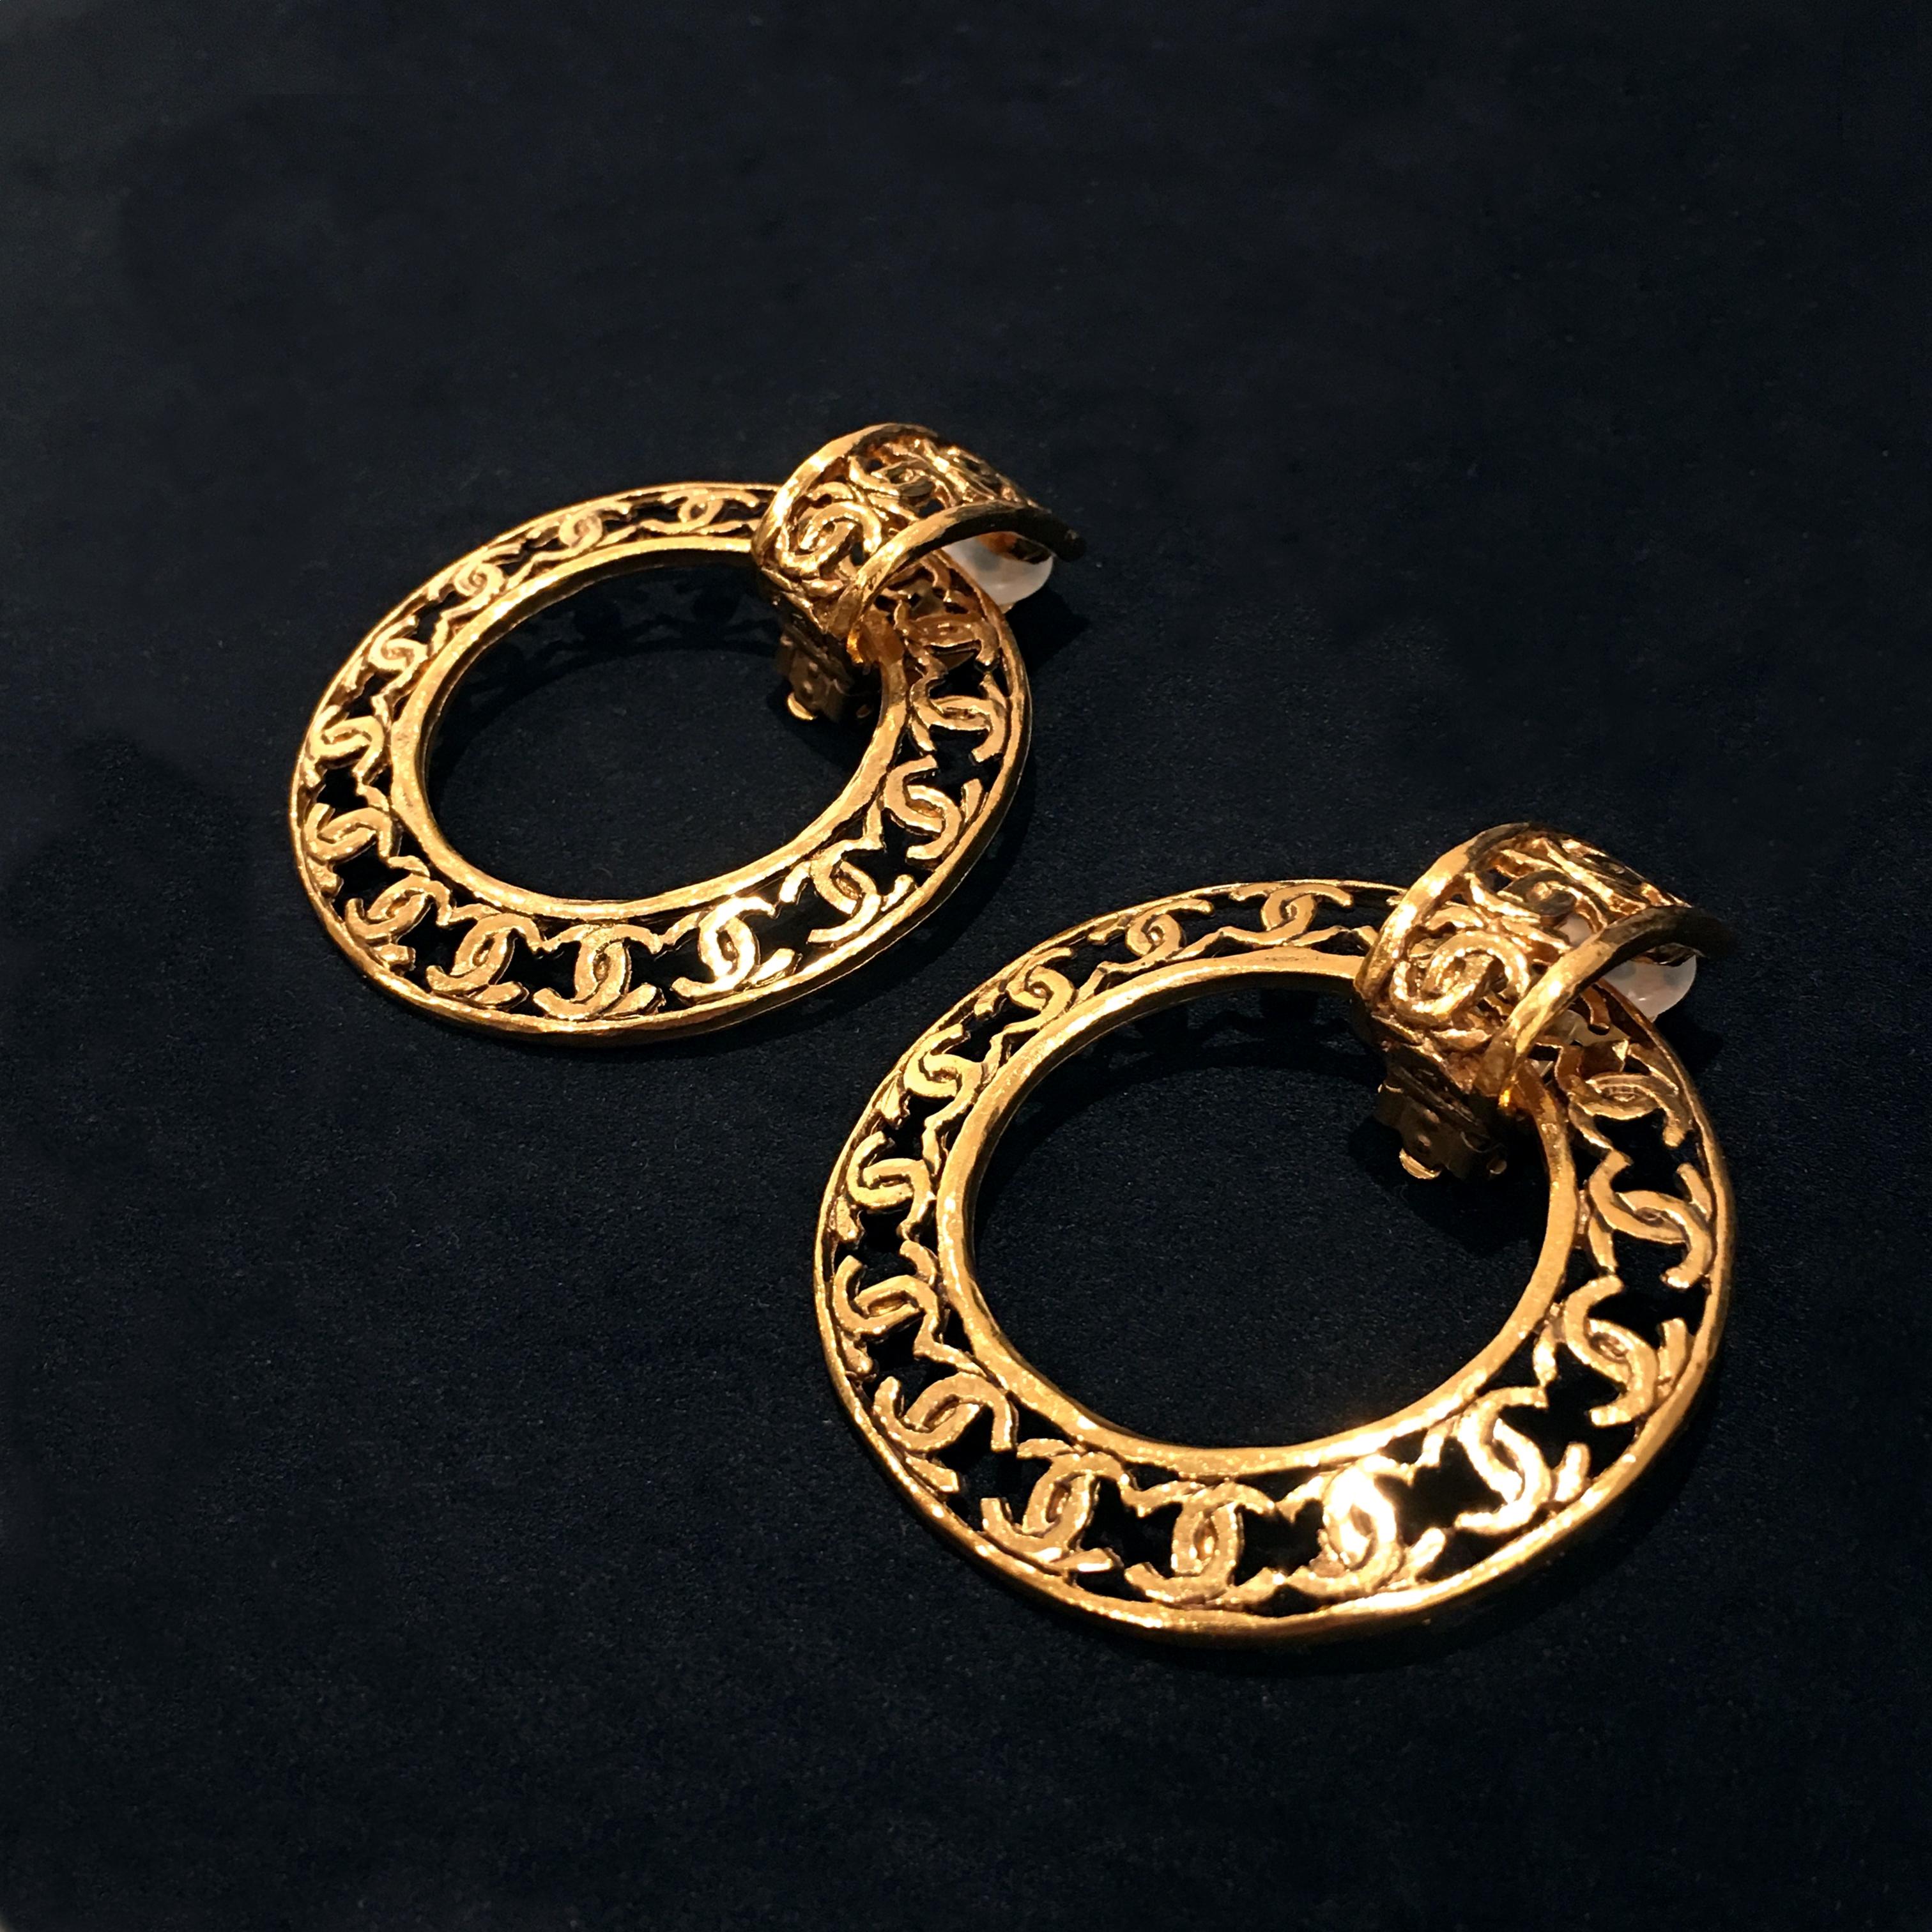 Brand: Chanel
Reference: JW388
Measurement of Earrings: 5cm x 6cm
Material: Gilt Metal
Mark: 